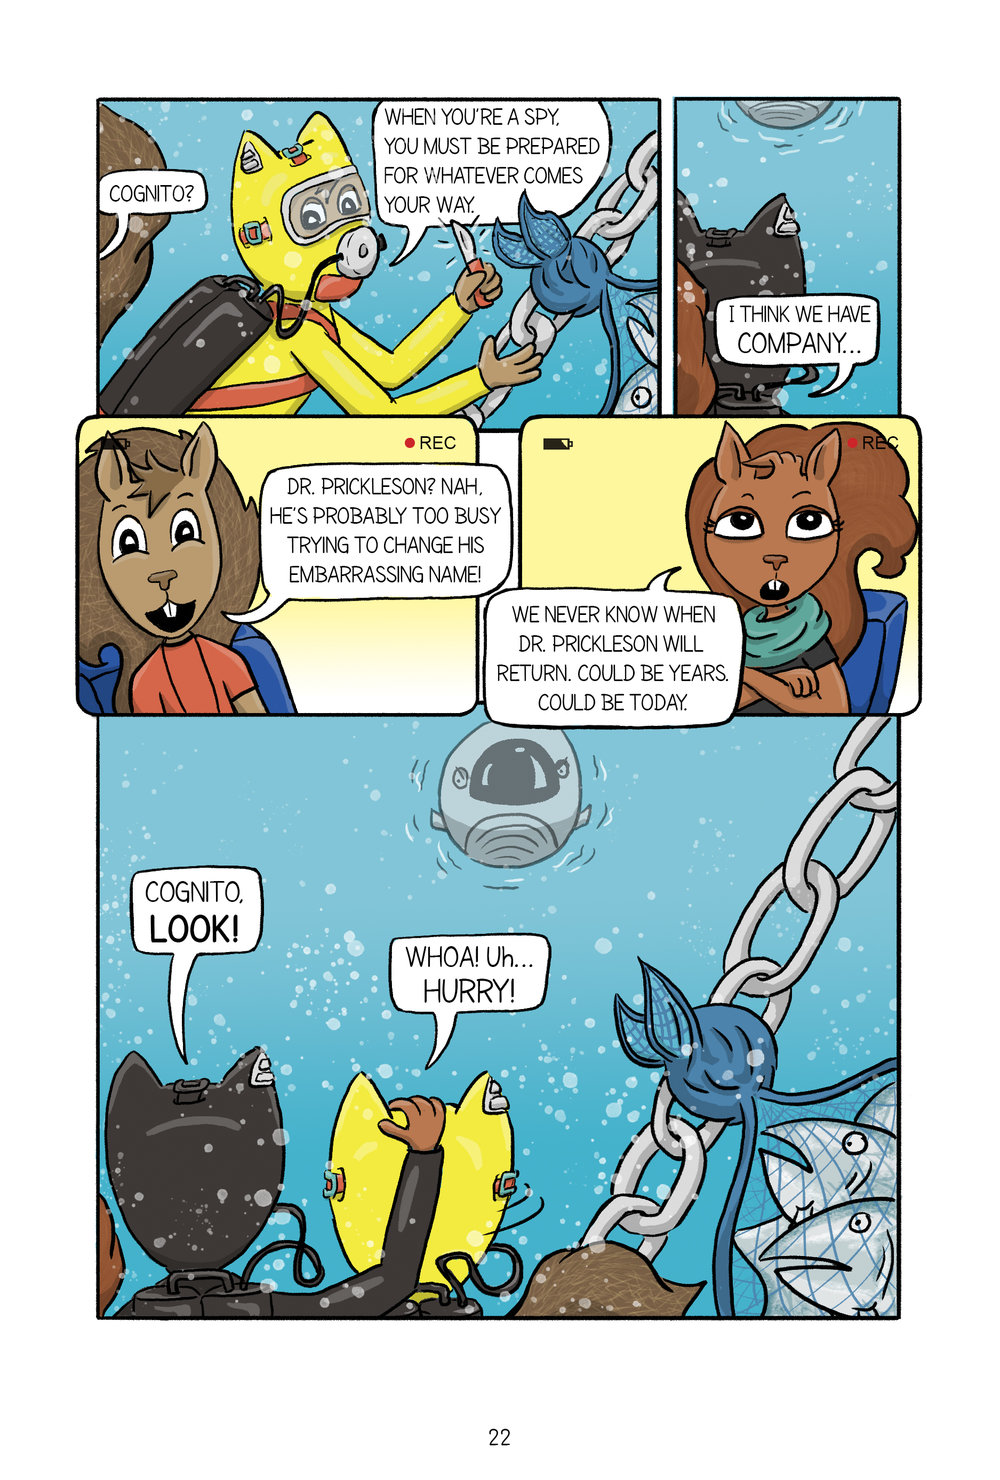 Page 22 something is approaching in the distance while Dash and Cognito work to free the fish